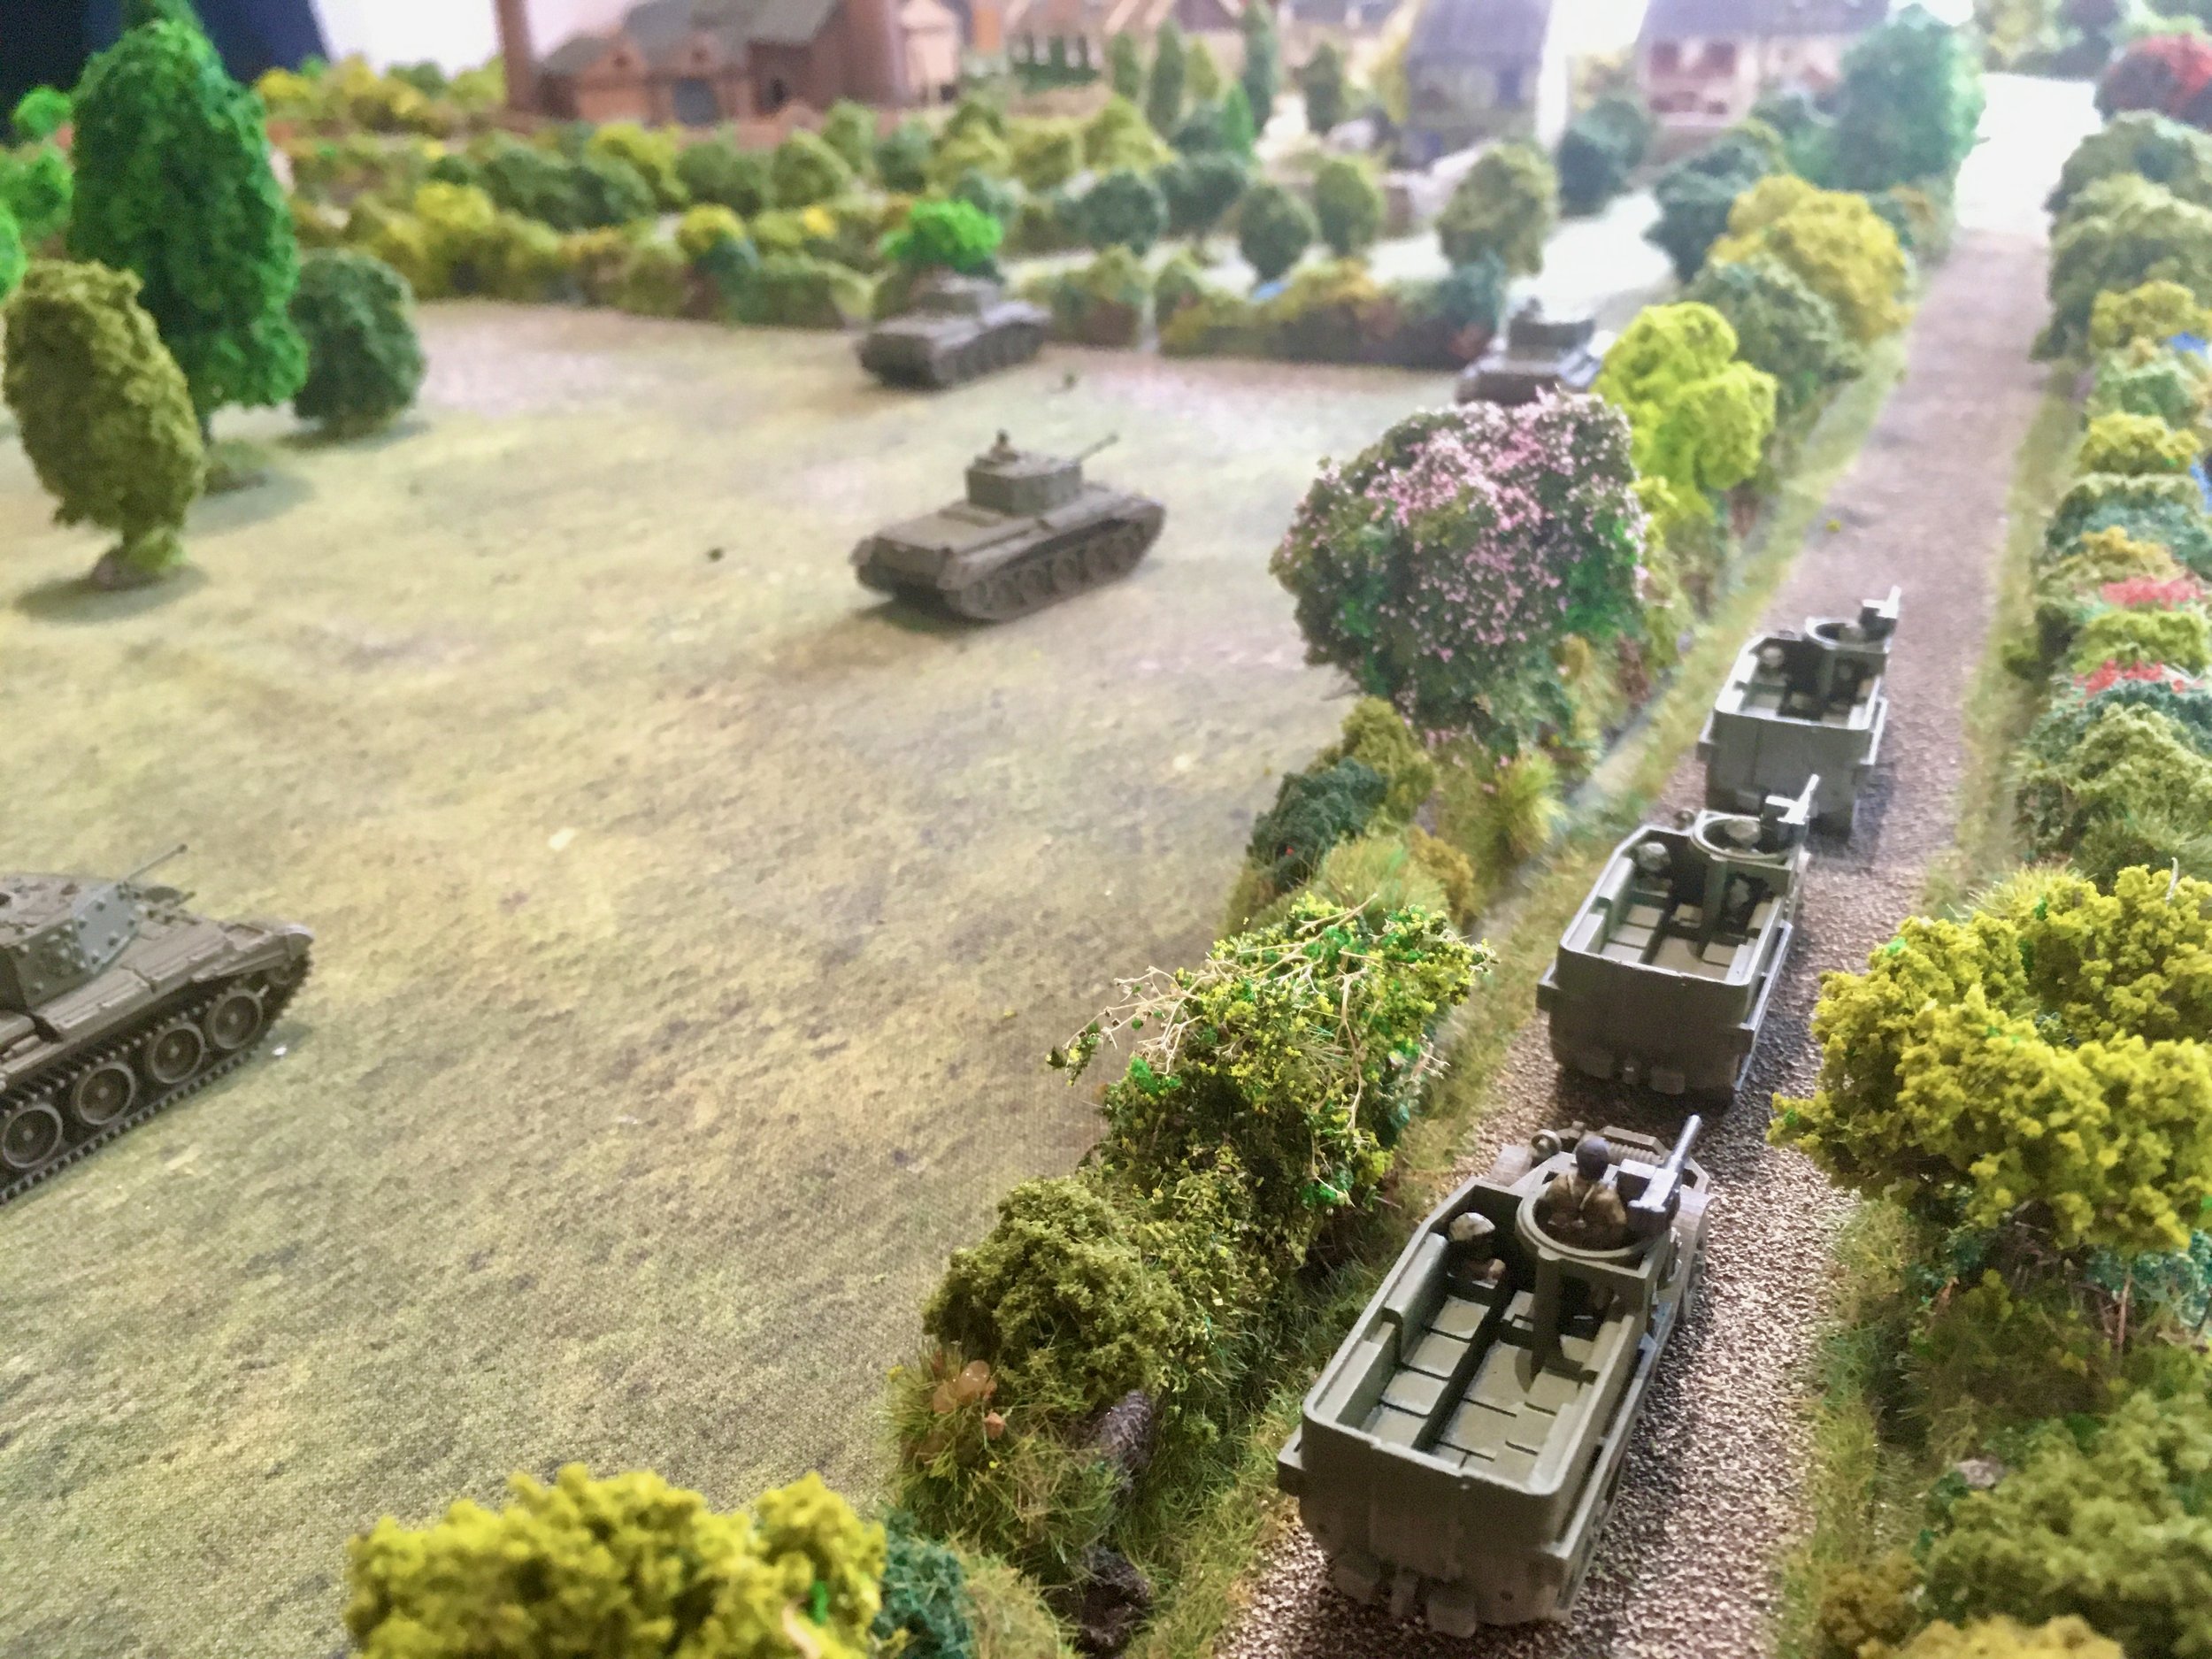 With one platoon of infantry accompanying the armour, a second advances parallel along one of the two roads leading into the village.